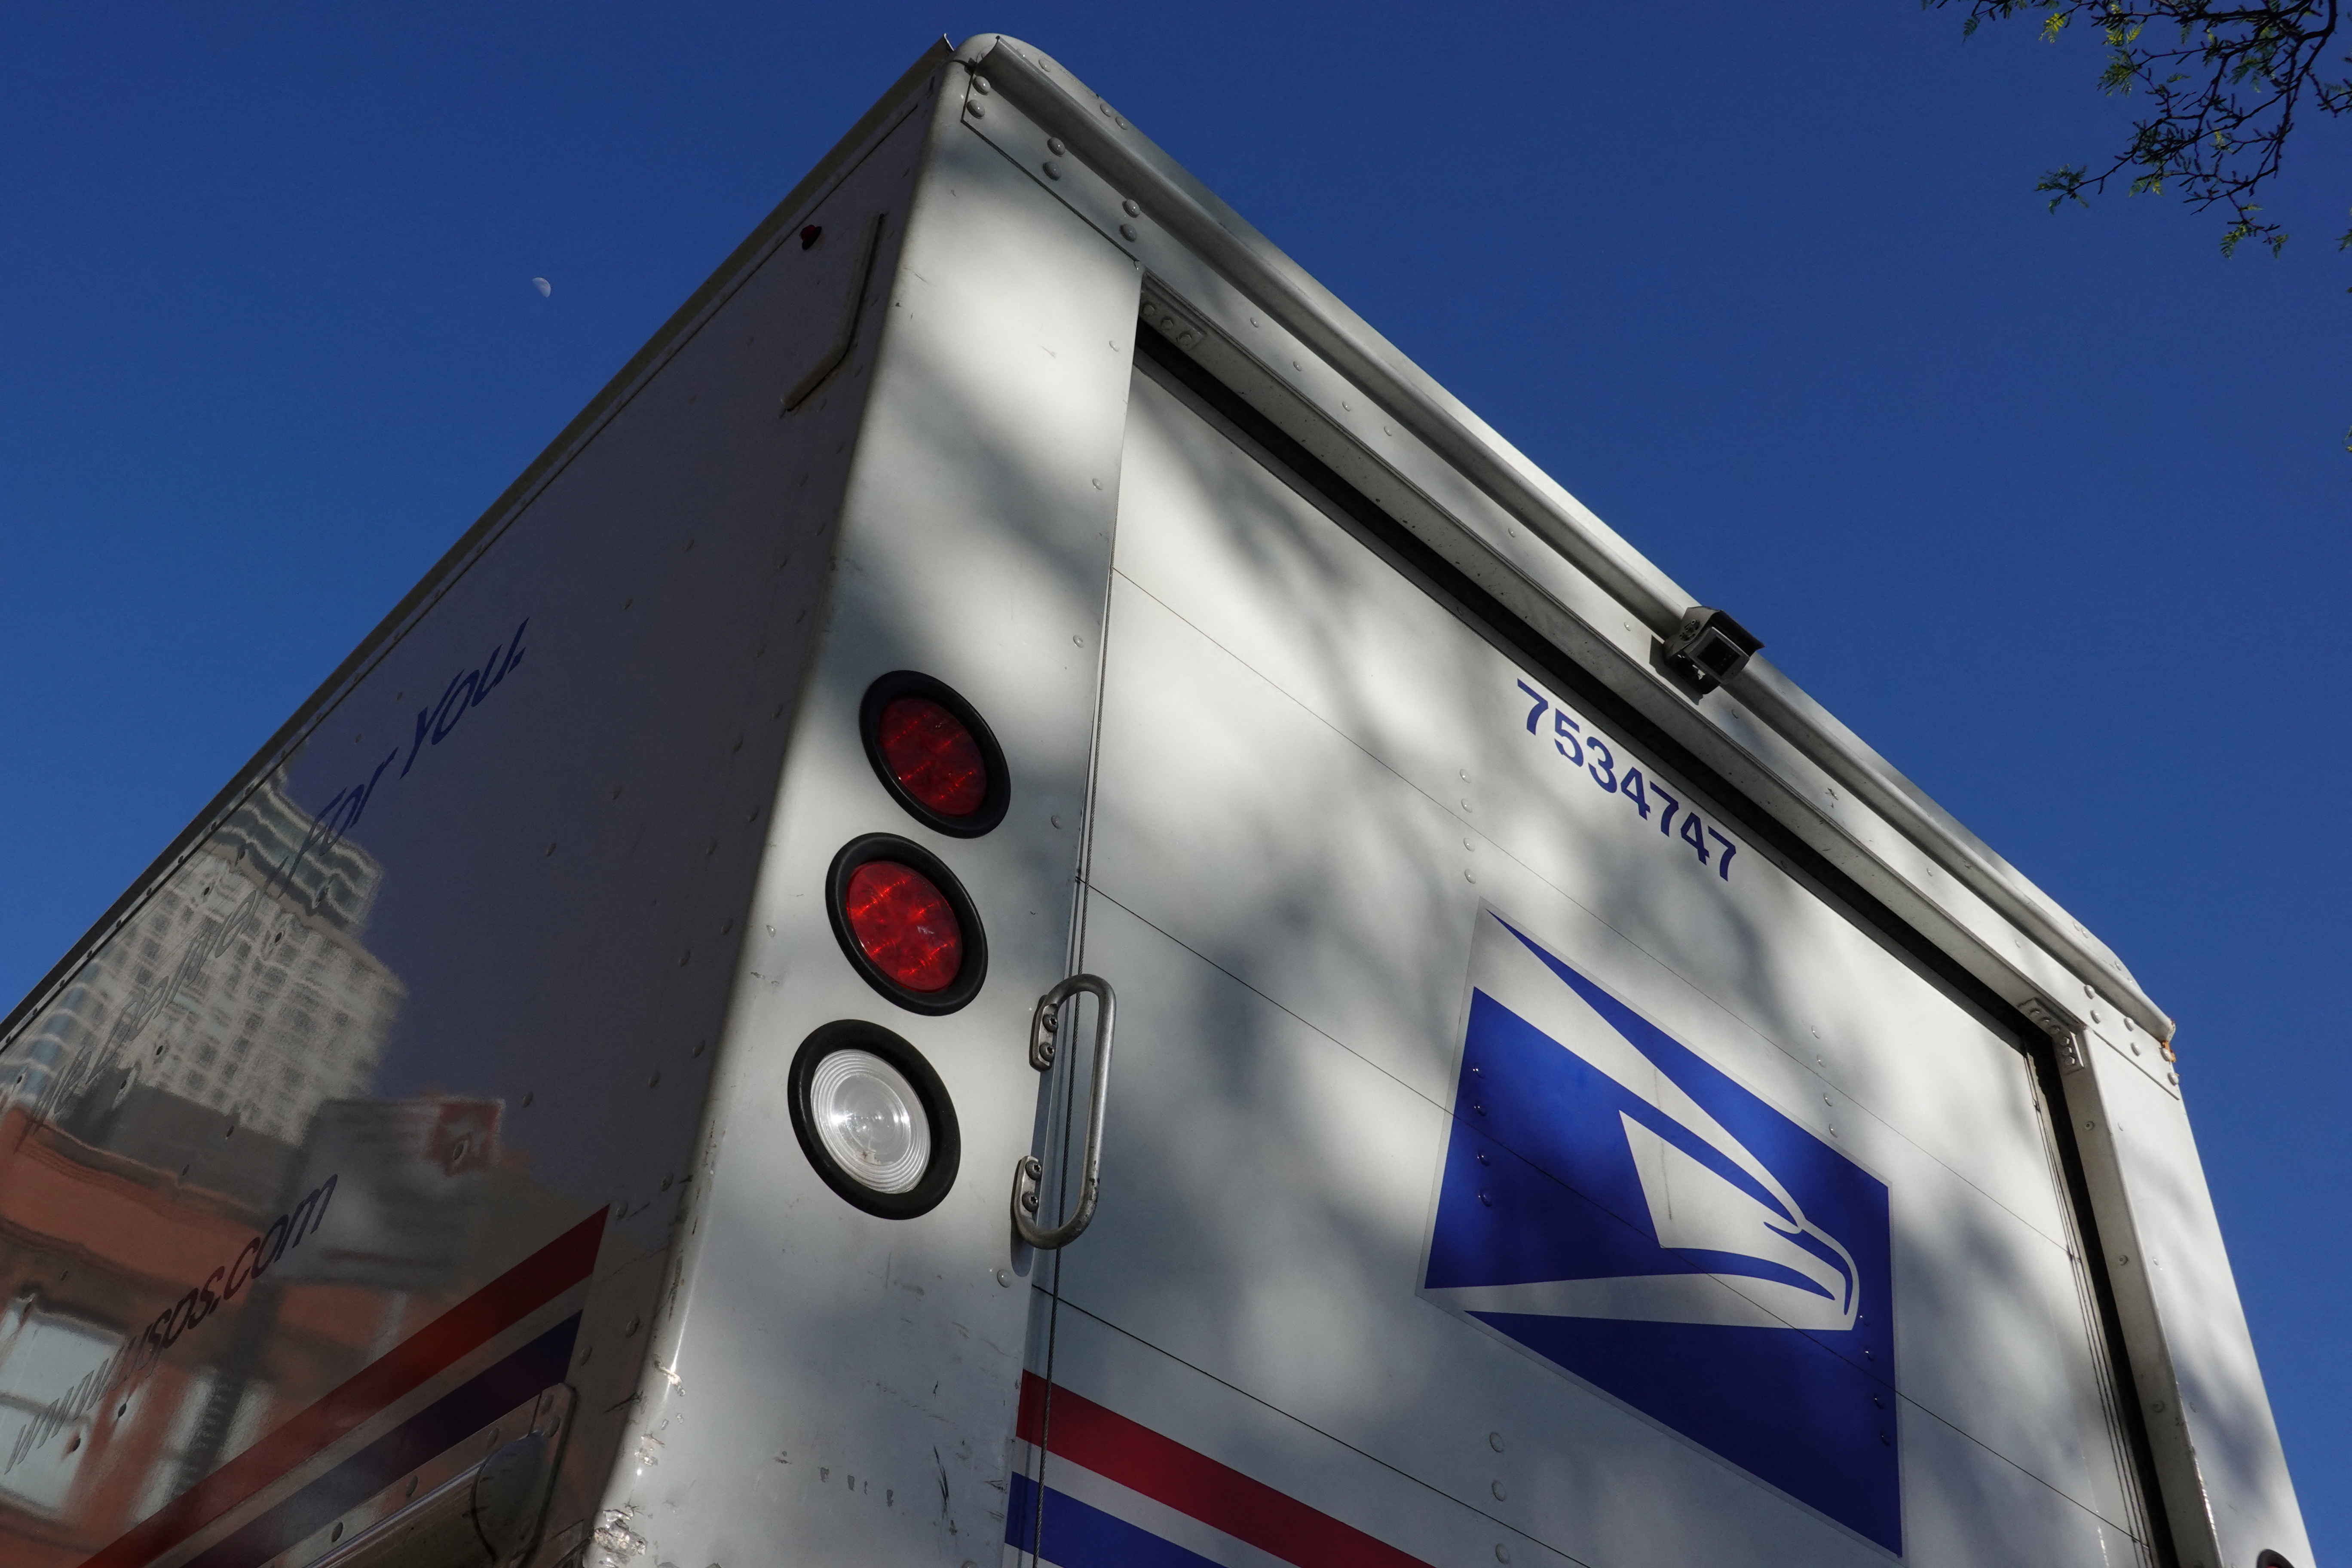 USPS: Postage stamp hikes set to begin in 2024